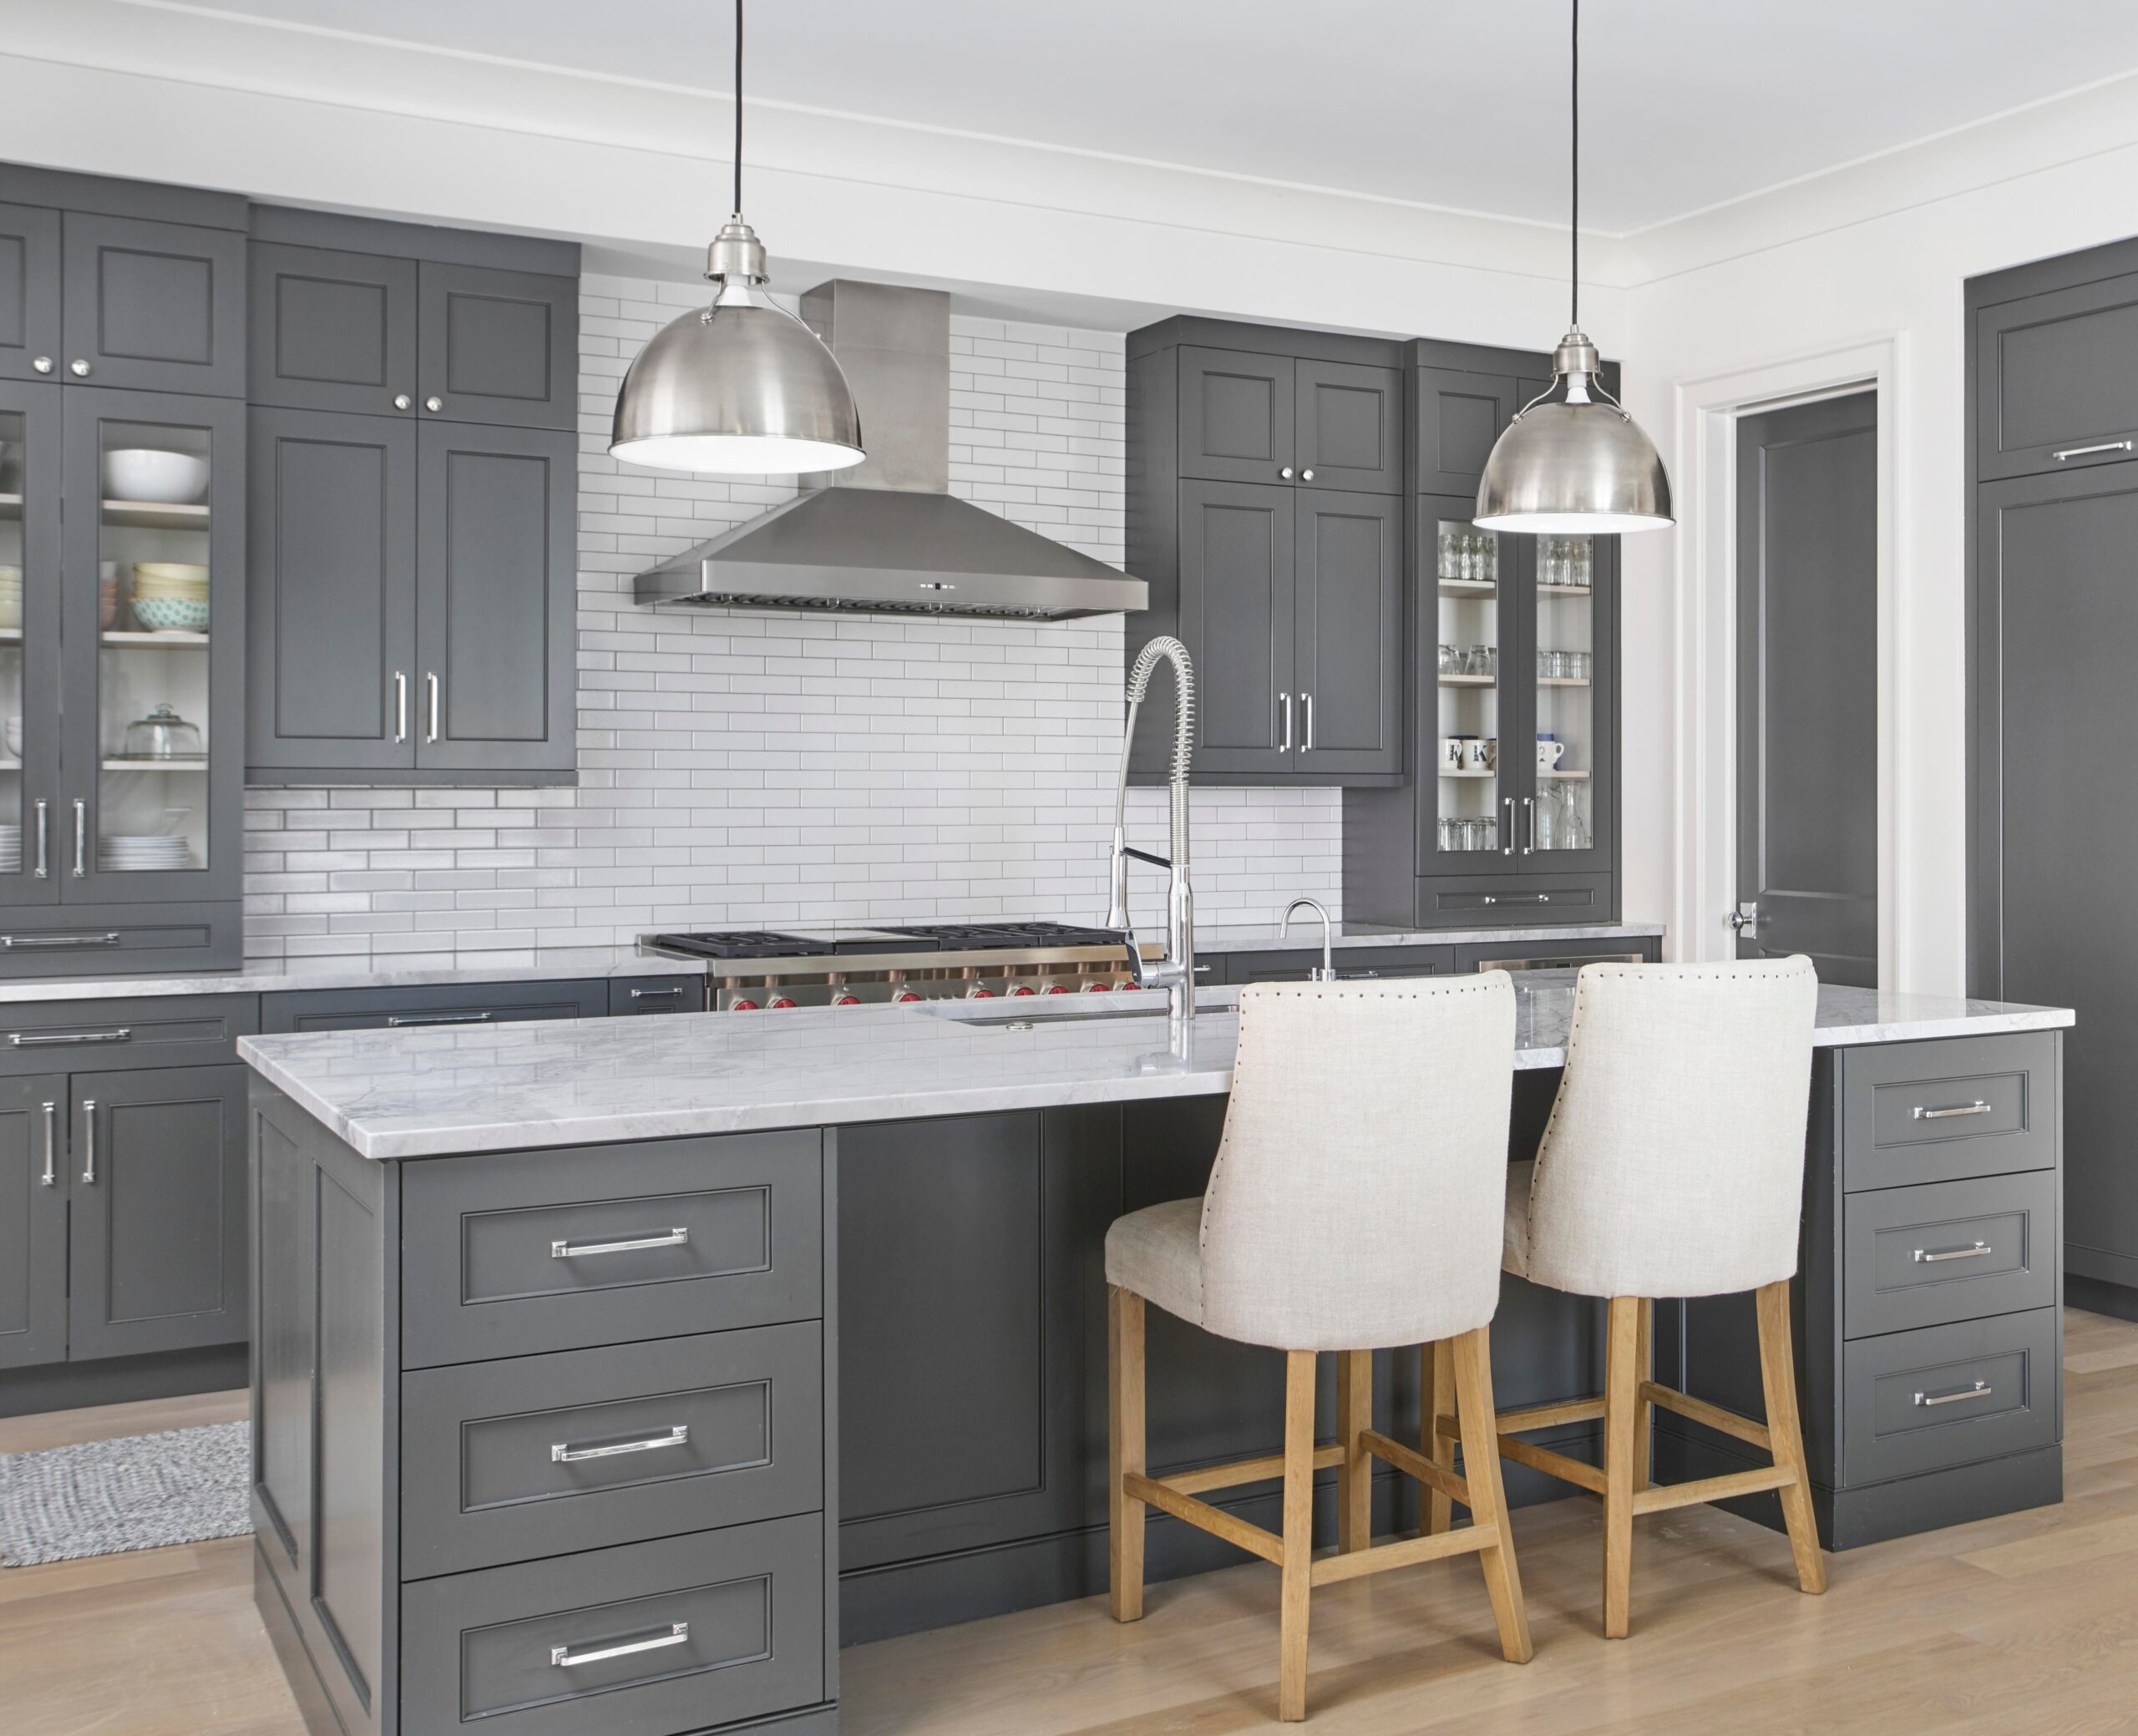 3 Sophisticated Gray Kitchen Ideas - Chic Gray Kitchens